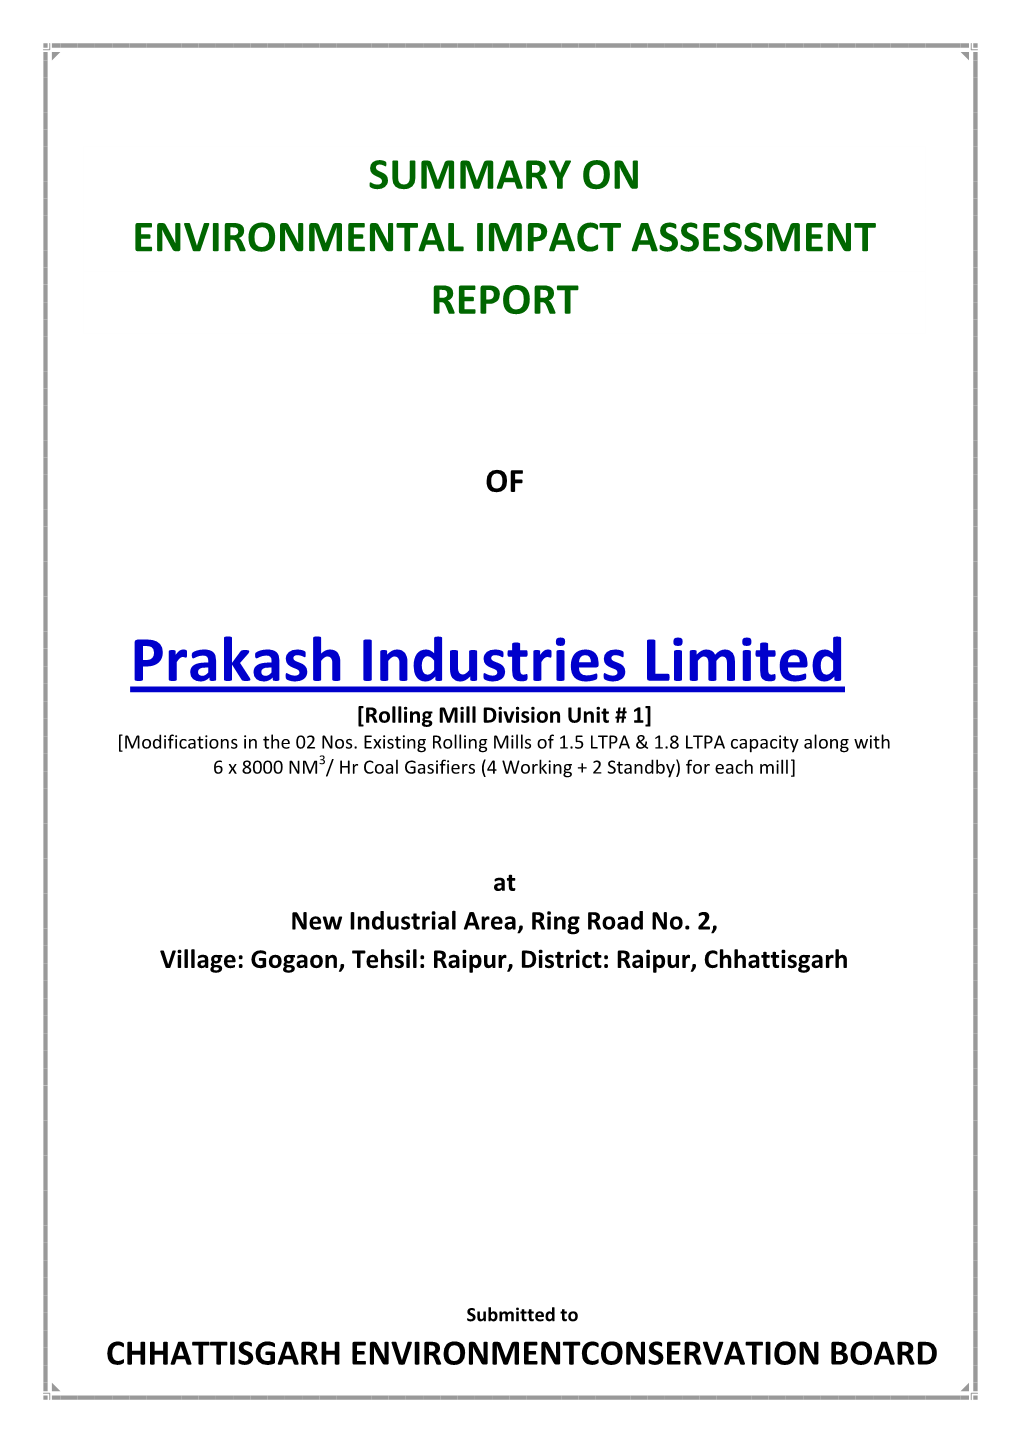 Prakash Industries Limited [Rolling Mill Division Unit # 1] [Modifications in the 02 Nos